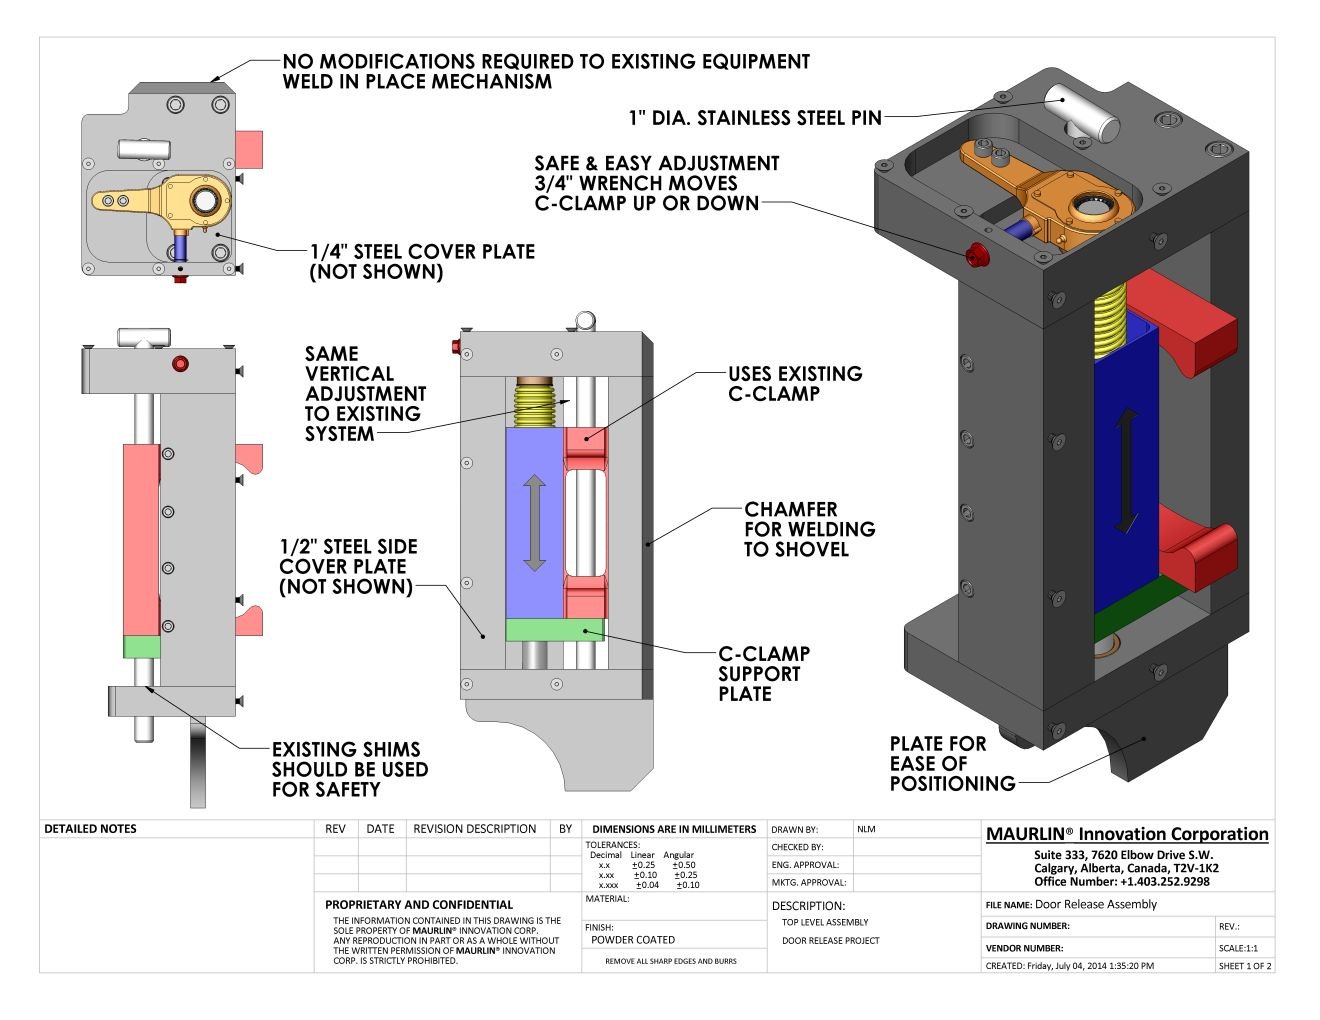 top level assembly drawing for custom power screw application